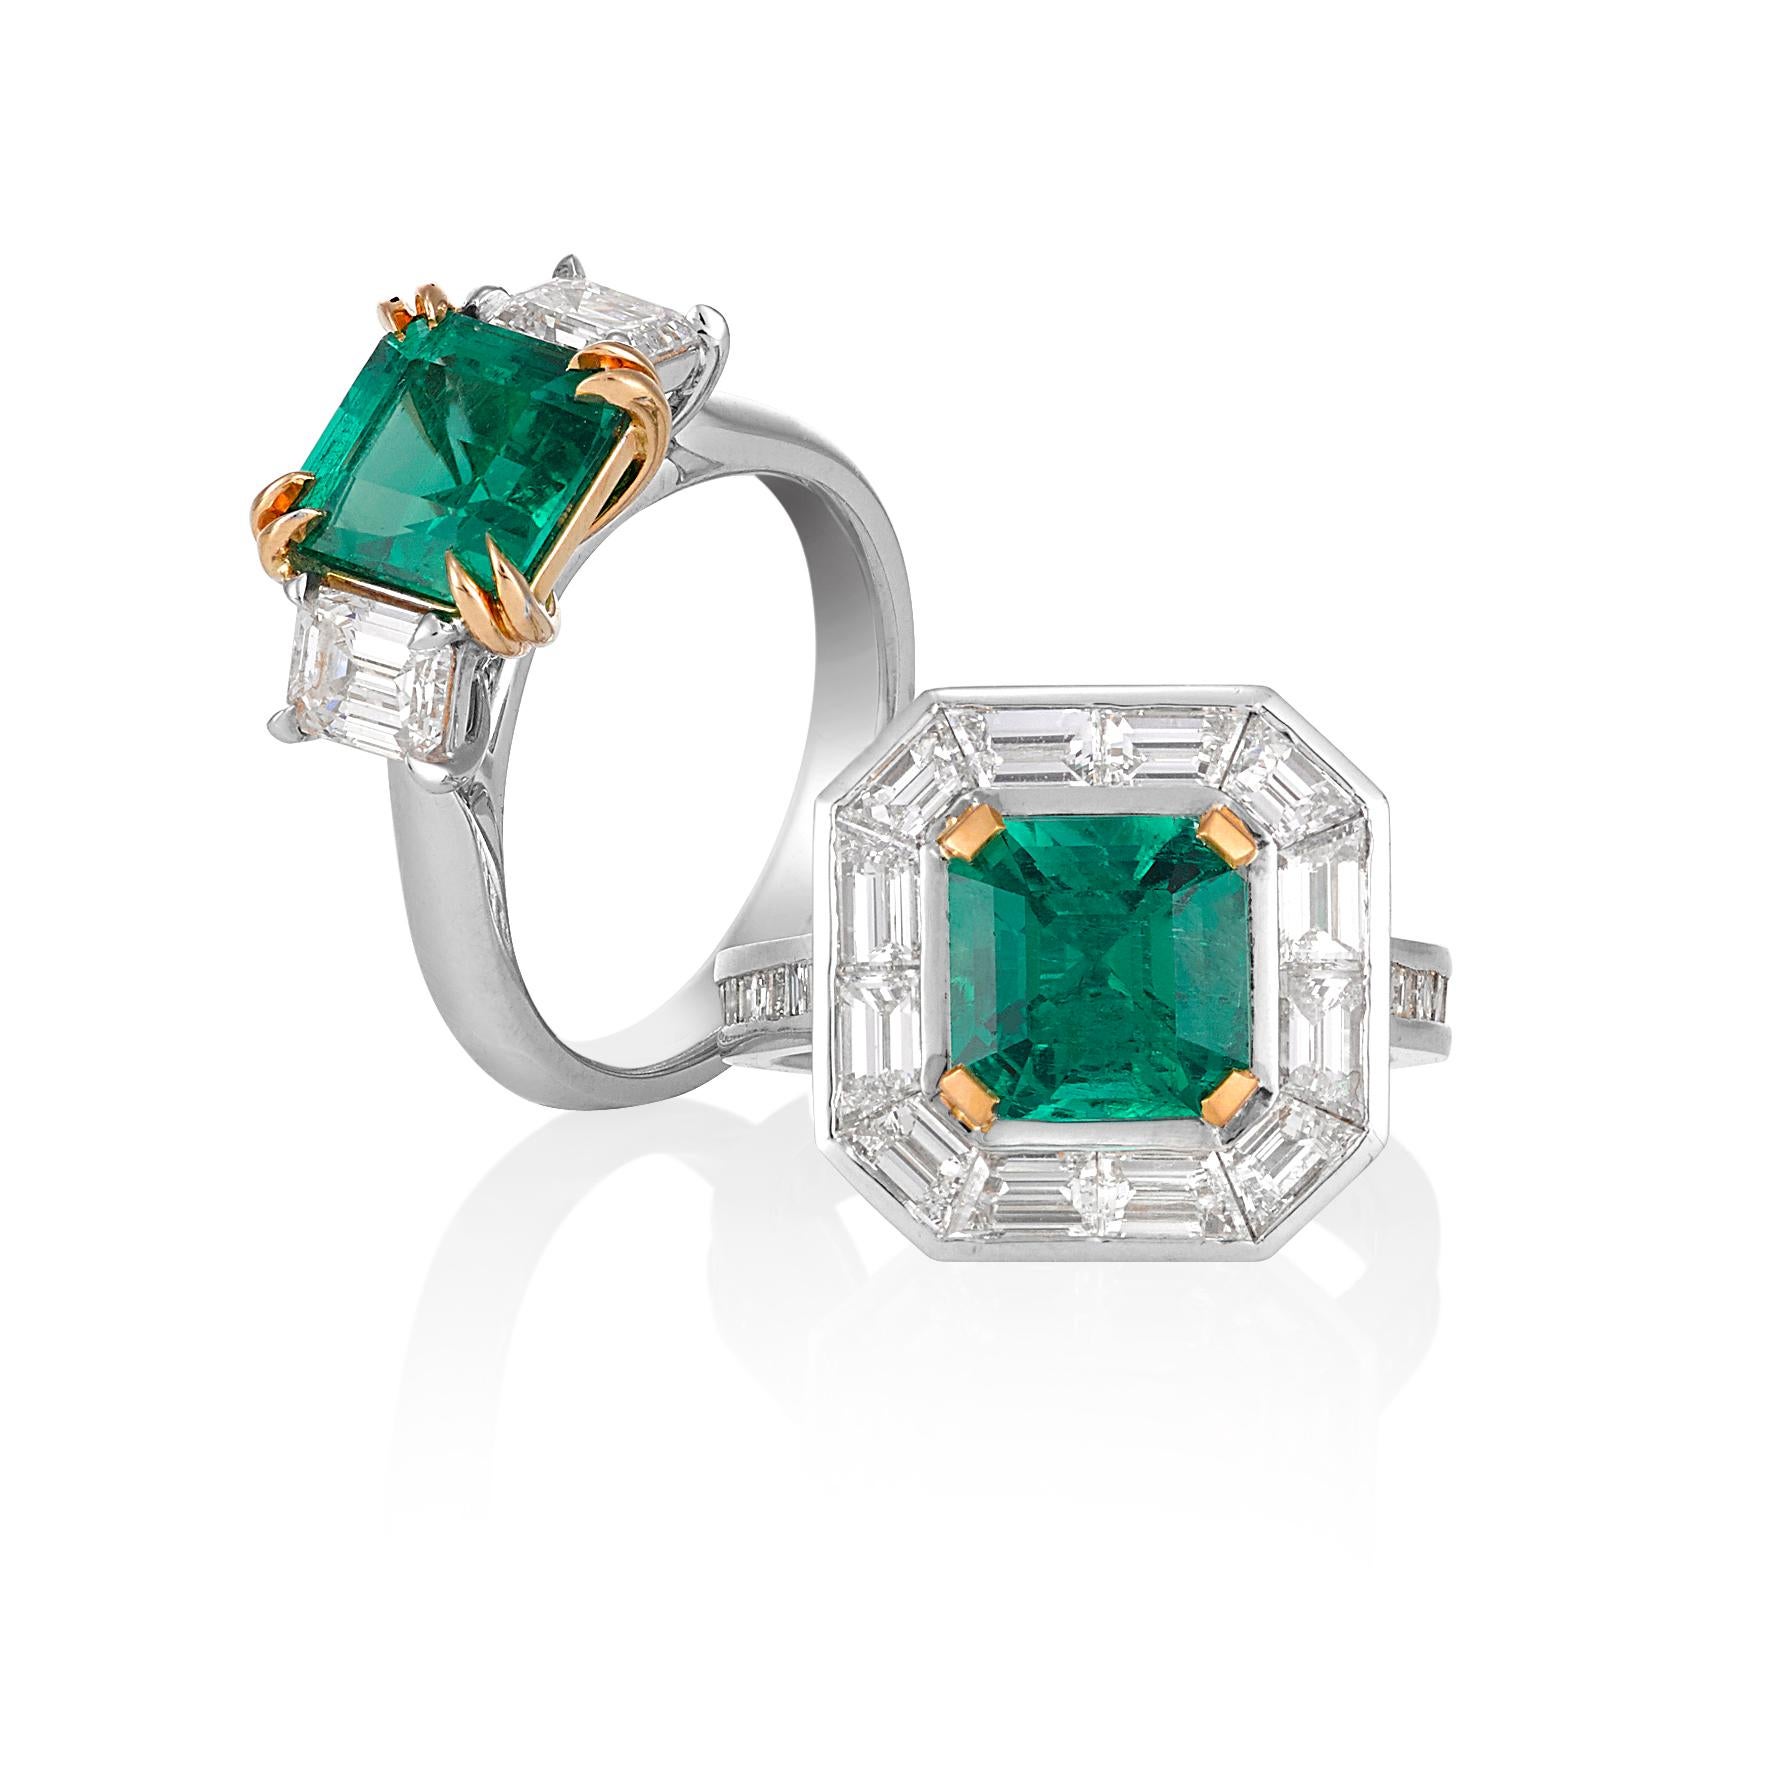 Handmade 18 Carat Yellow and White Gold Cocktail ring, set with Certified, Natural, 2.35 Carat, Square Emerald Cut, Afghan Emerald 'Vivid Green' as per D. Dunaigre report # CDC 1408336, set in 22 Carat Yellow gold claws, surrounded by 12 Baguette